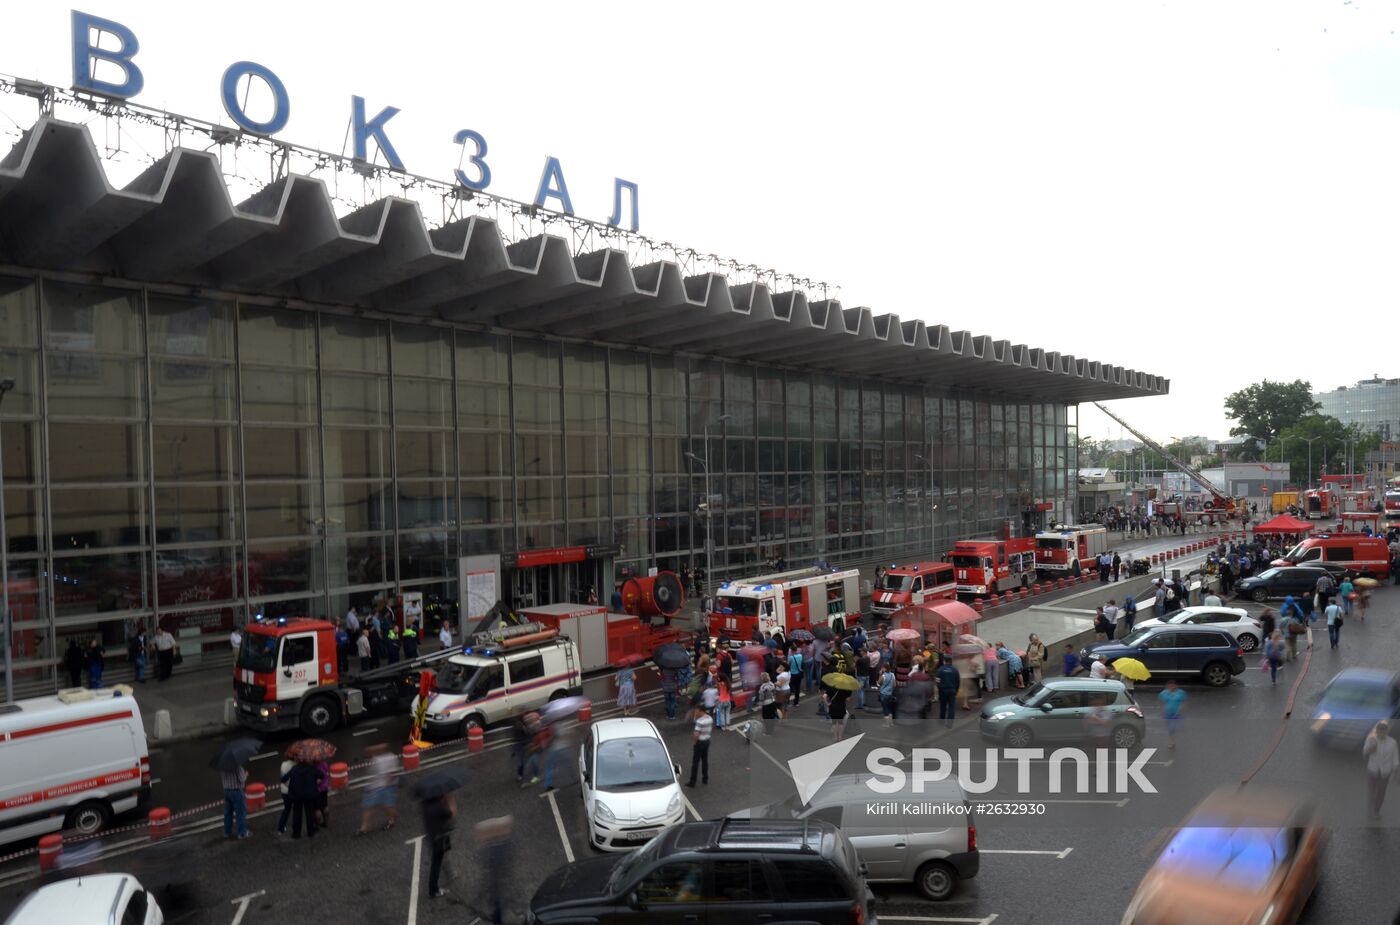 A fire drill at Moscow's Kursky Railway Station